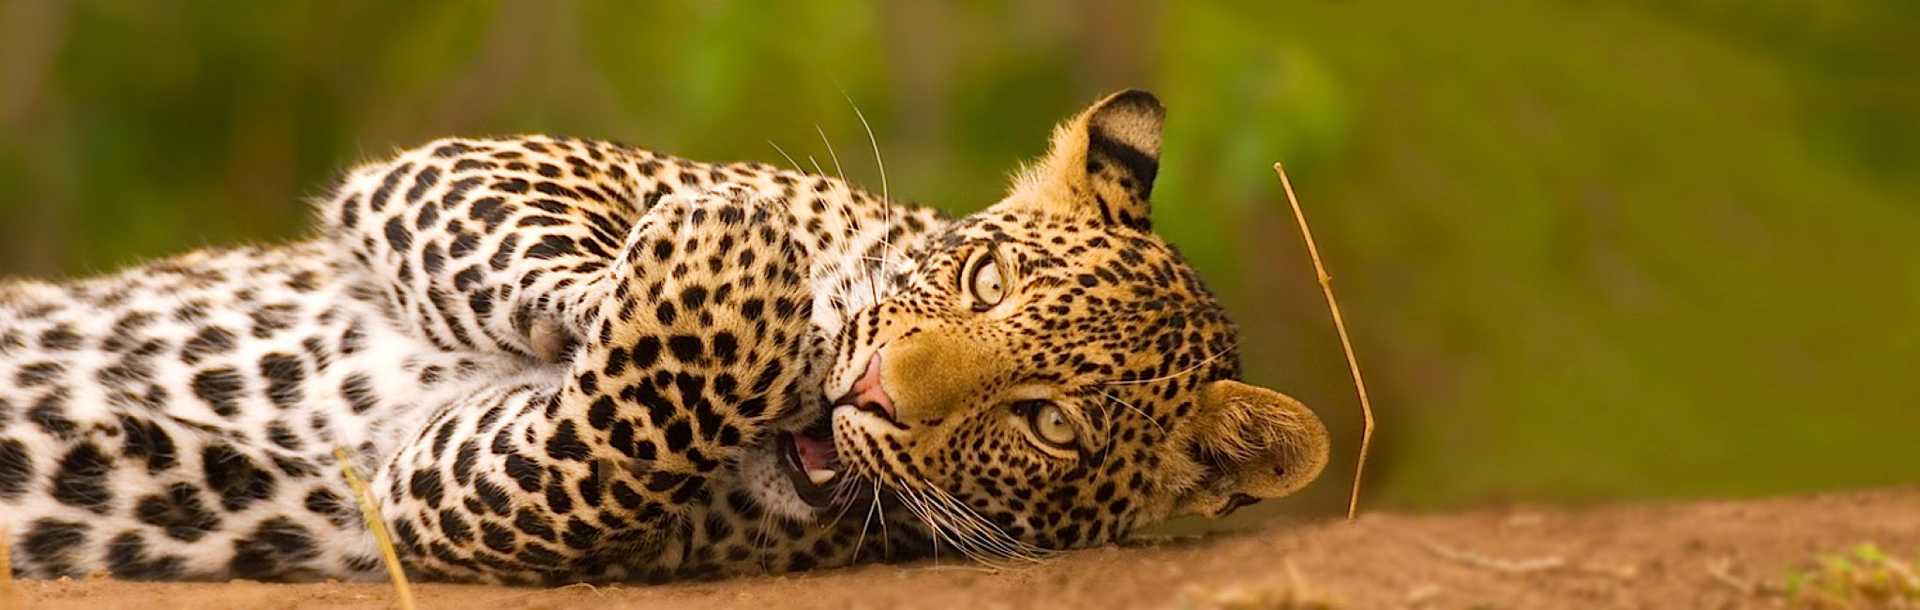 Playful leopard seen on a Safari in South Africa.